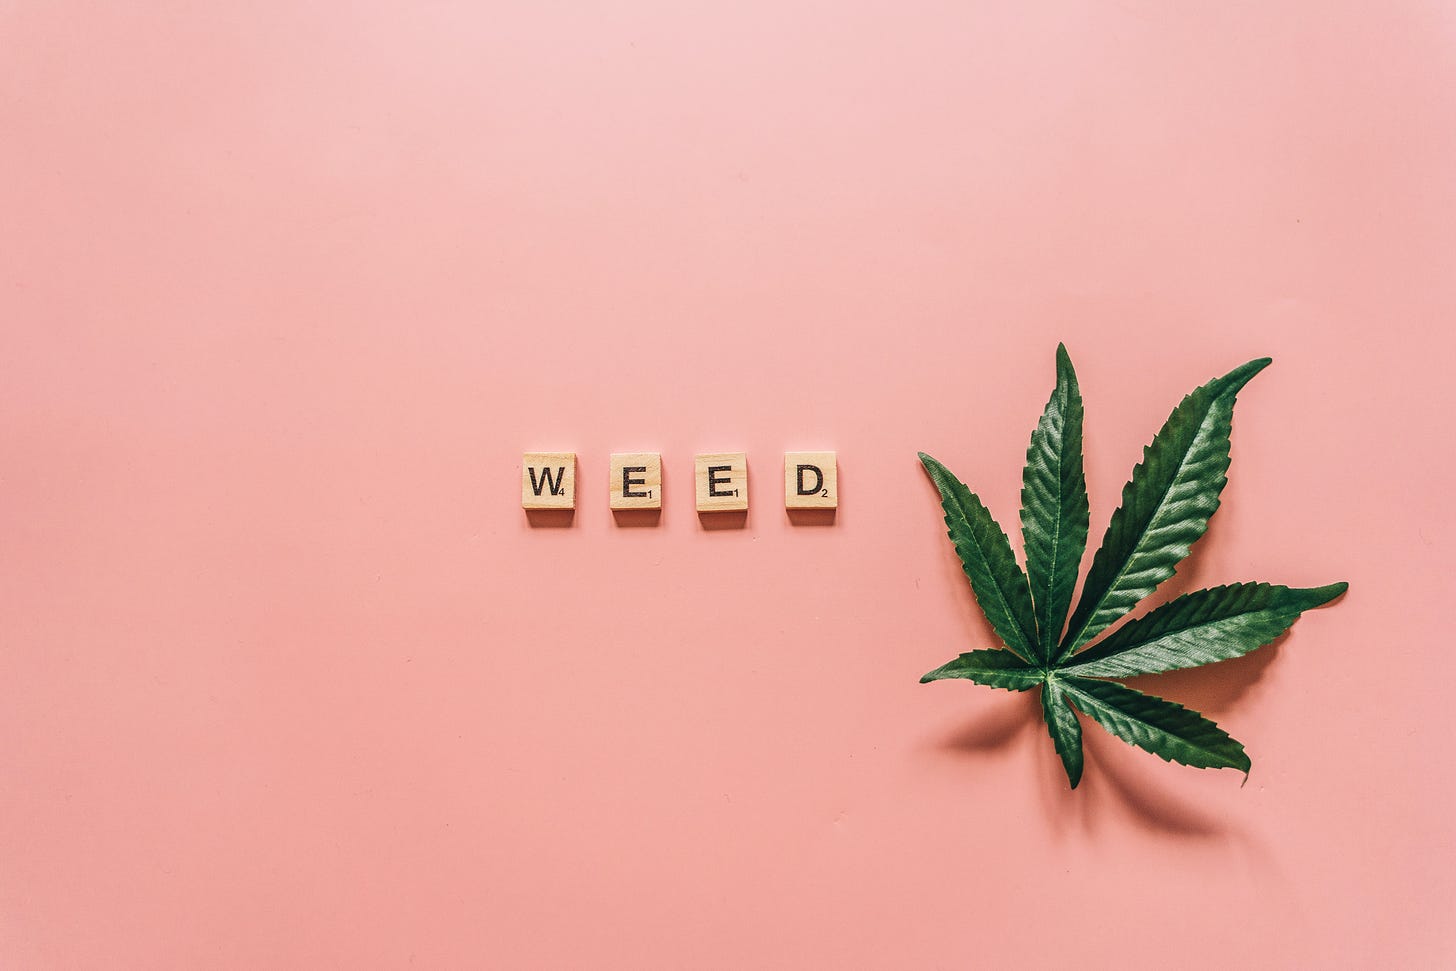 Scrabble tiles spell out “weed” on a pink background, and a fresh, dark green, cannabis leaf sits next to it on the right.